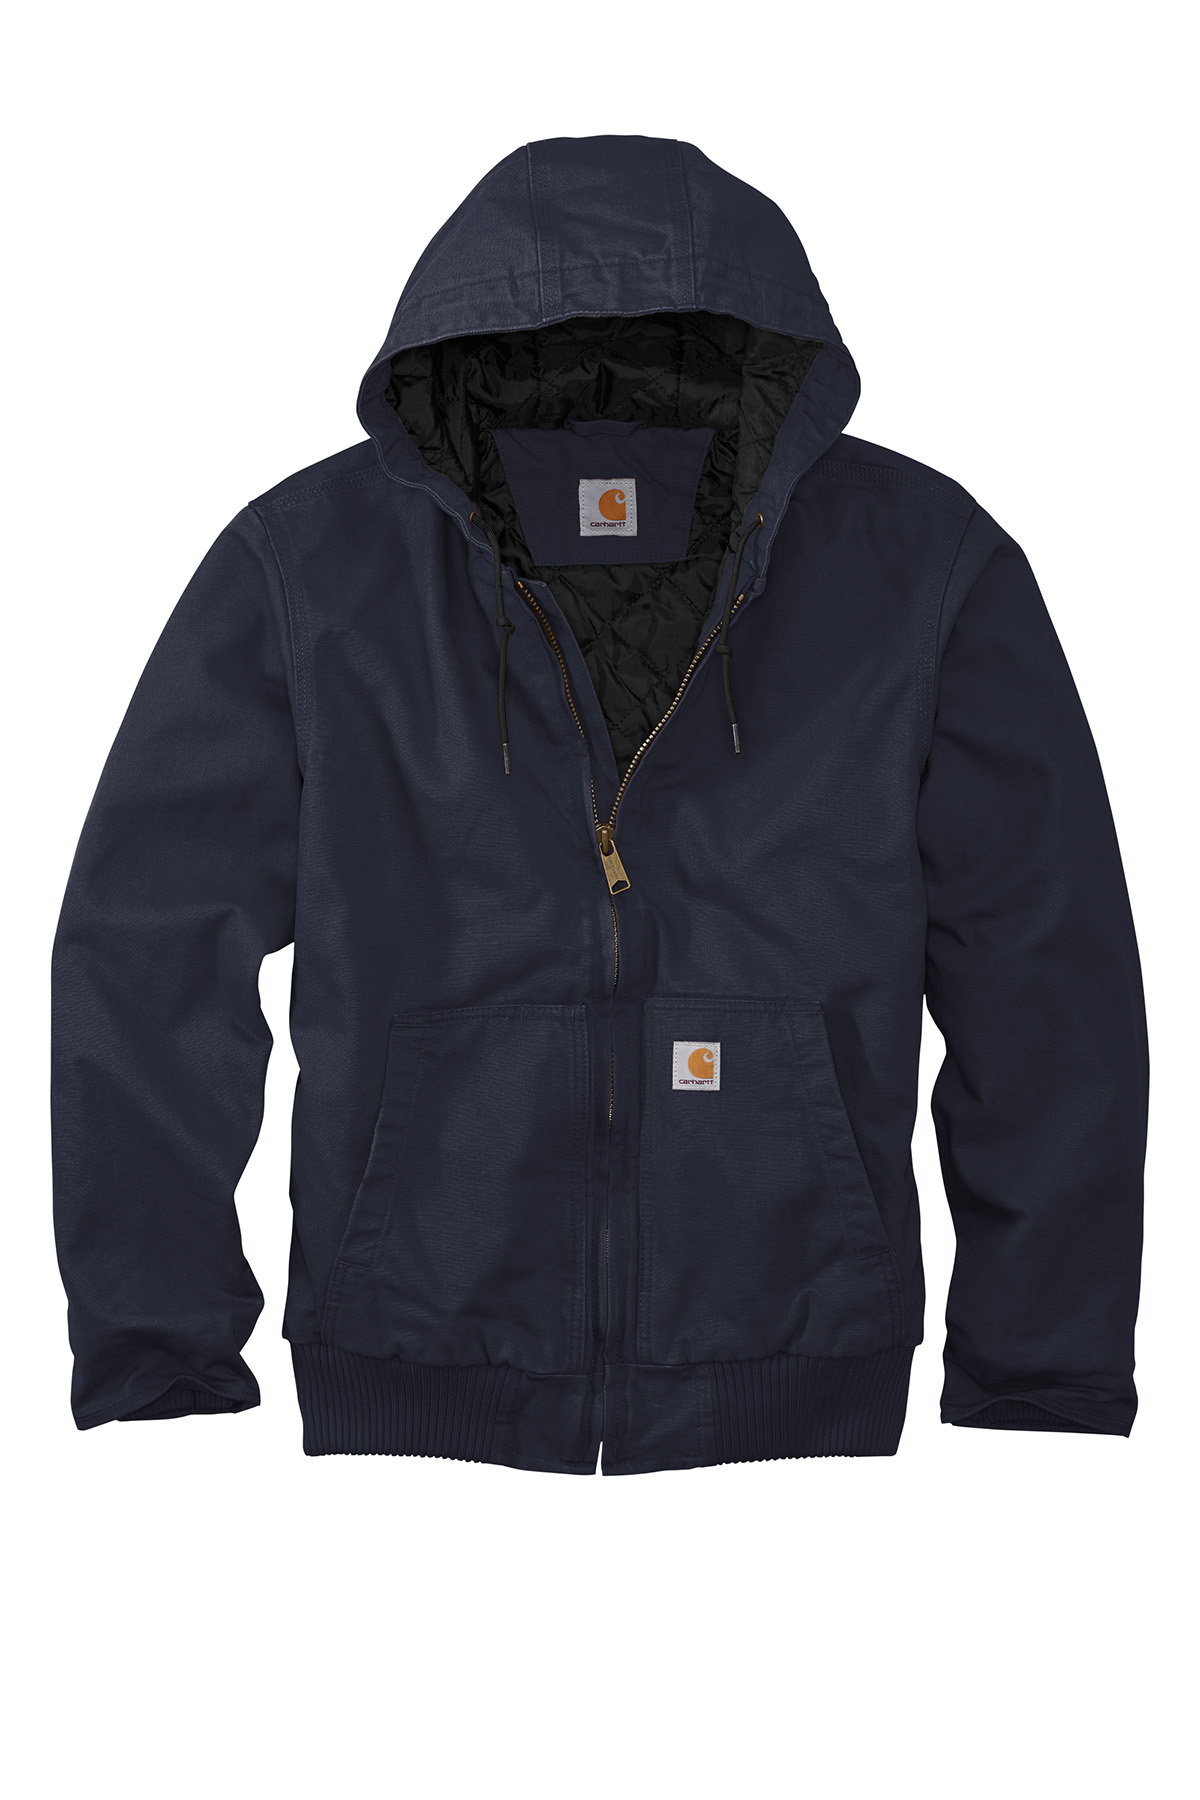 acuut Toestemming Glimmend Carhartt Washed Duck Active Jac | Product | SanMar